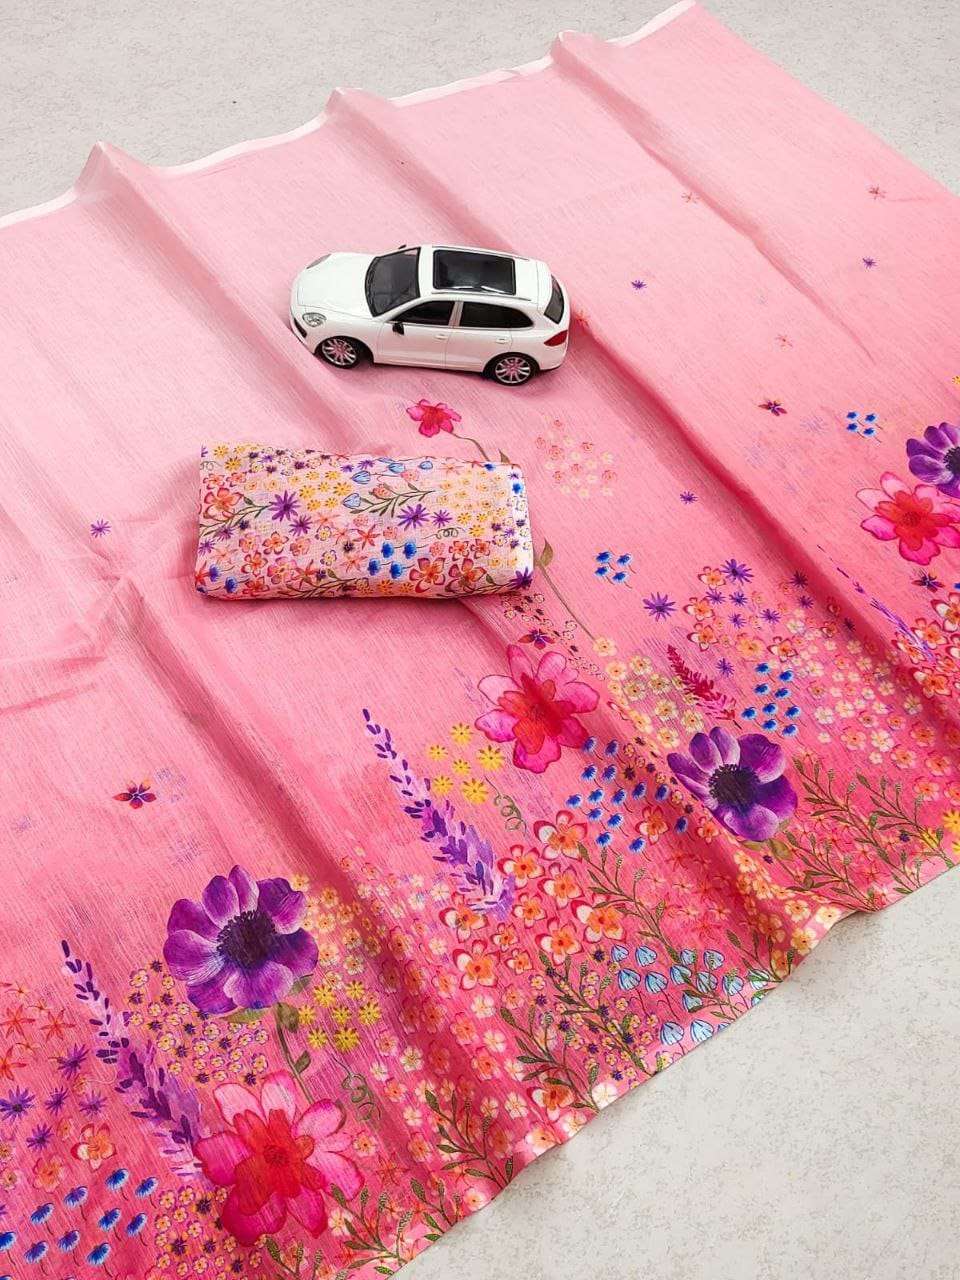 SUMMER SPECIAL LINEN WITH FLOWER PRINTED SAREE BEST WHOLESAL...